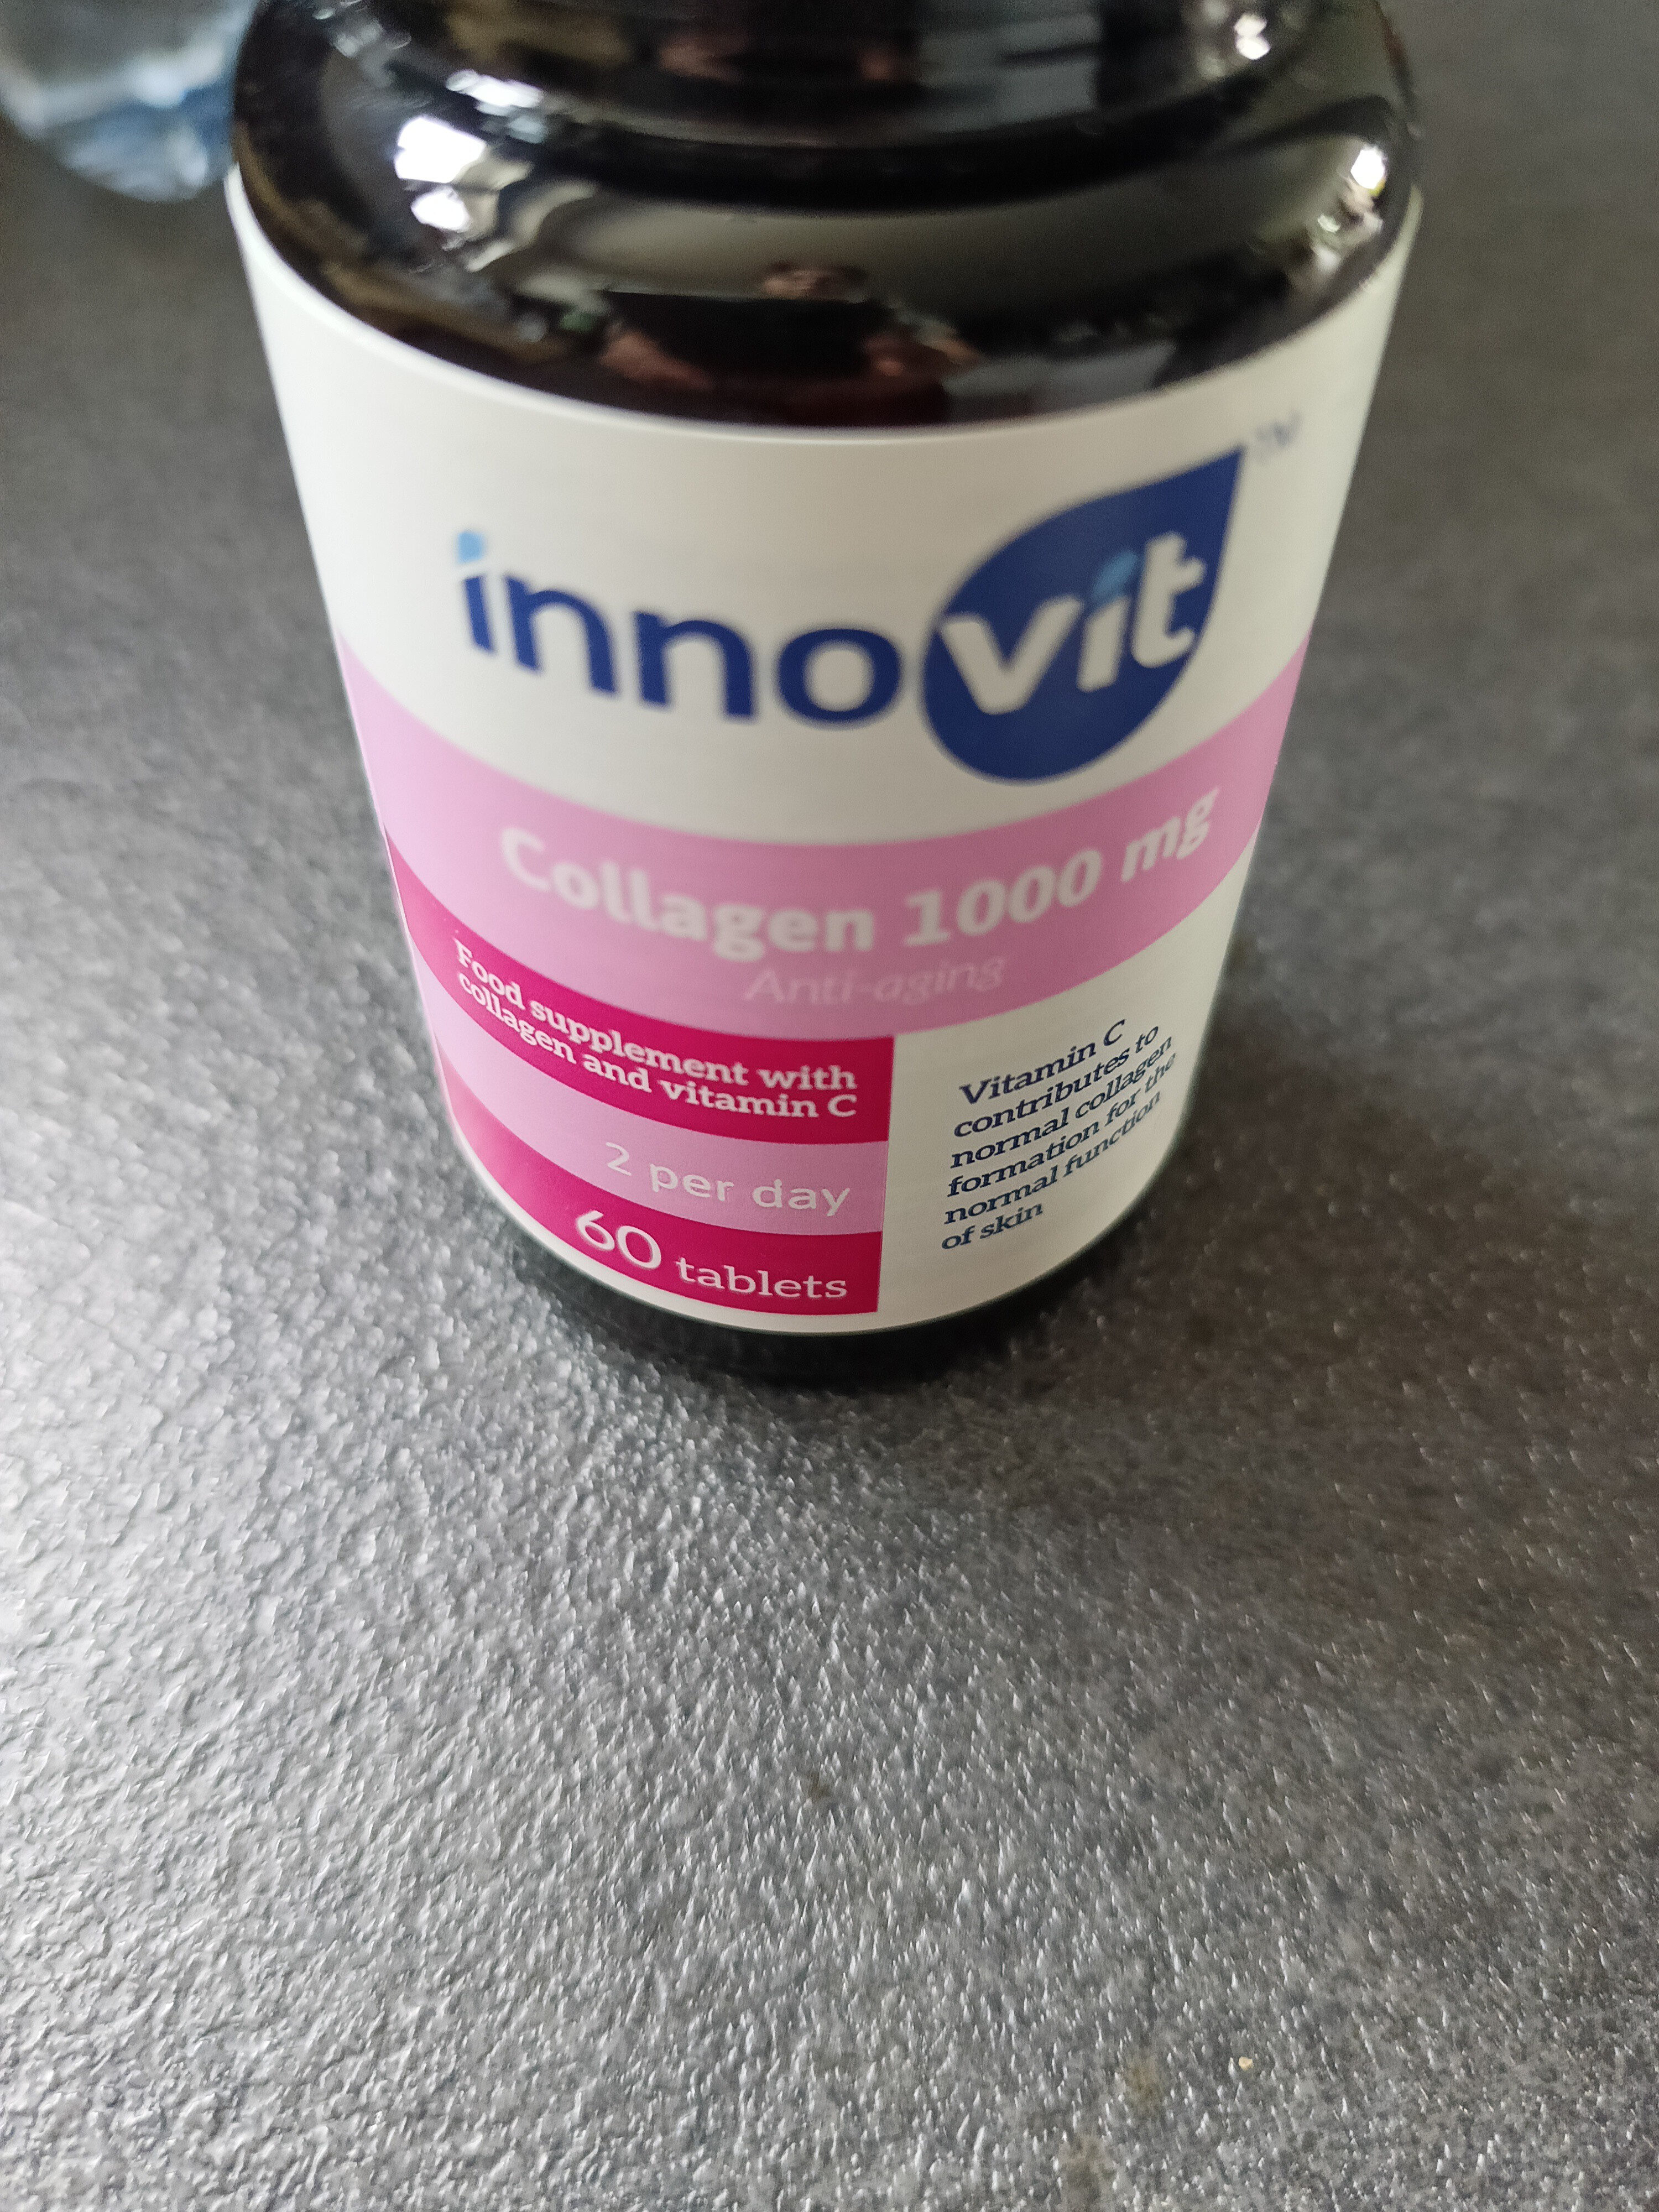 collagen 1000mg - Tuote - fr